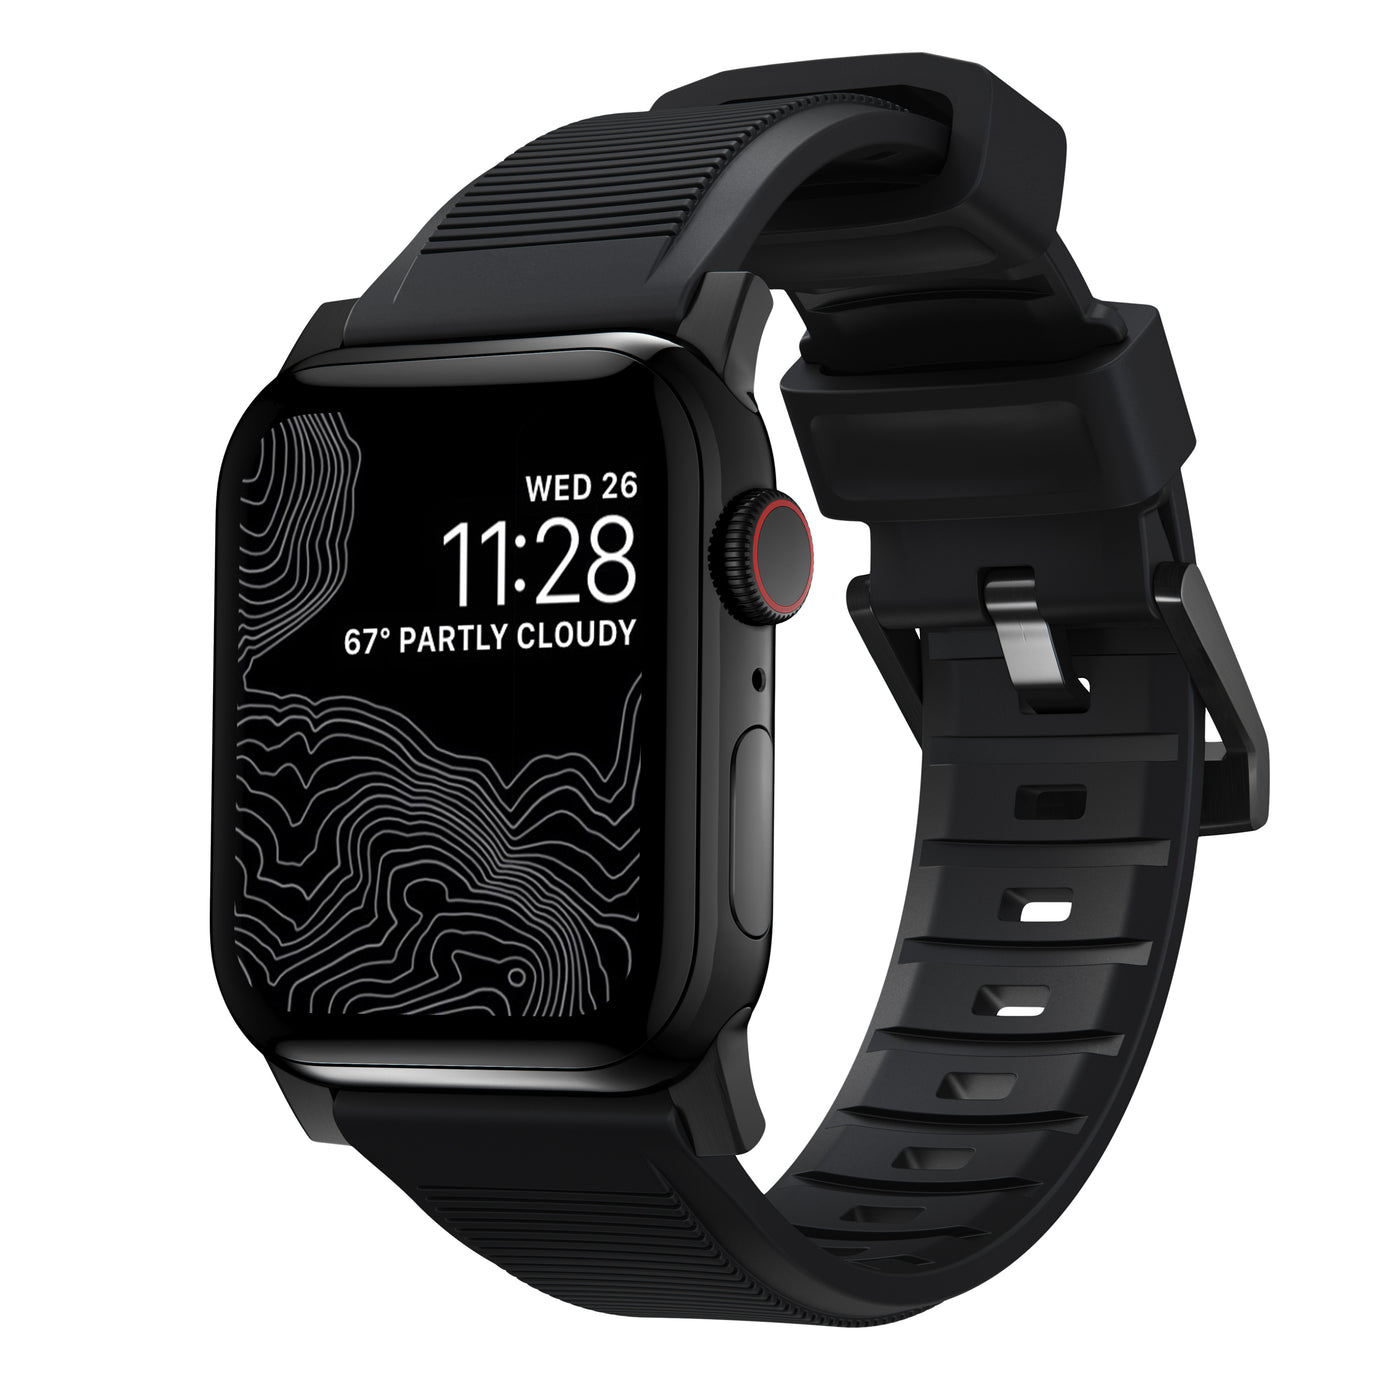 Rugged Band for Apple Watch